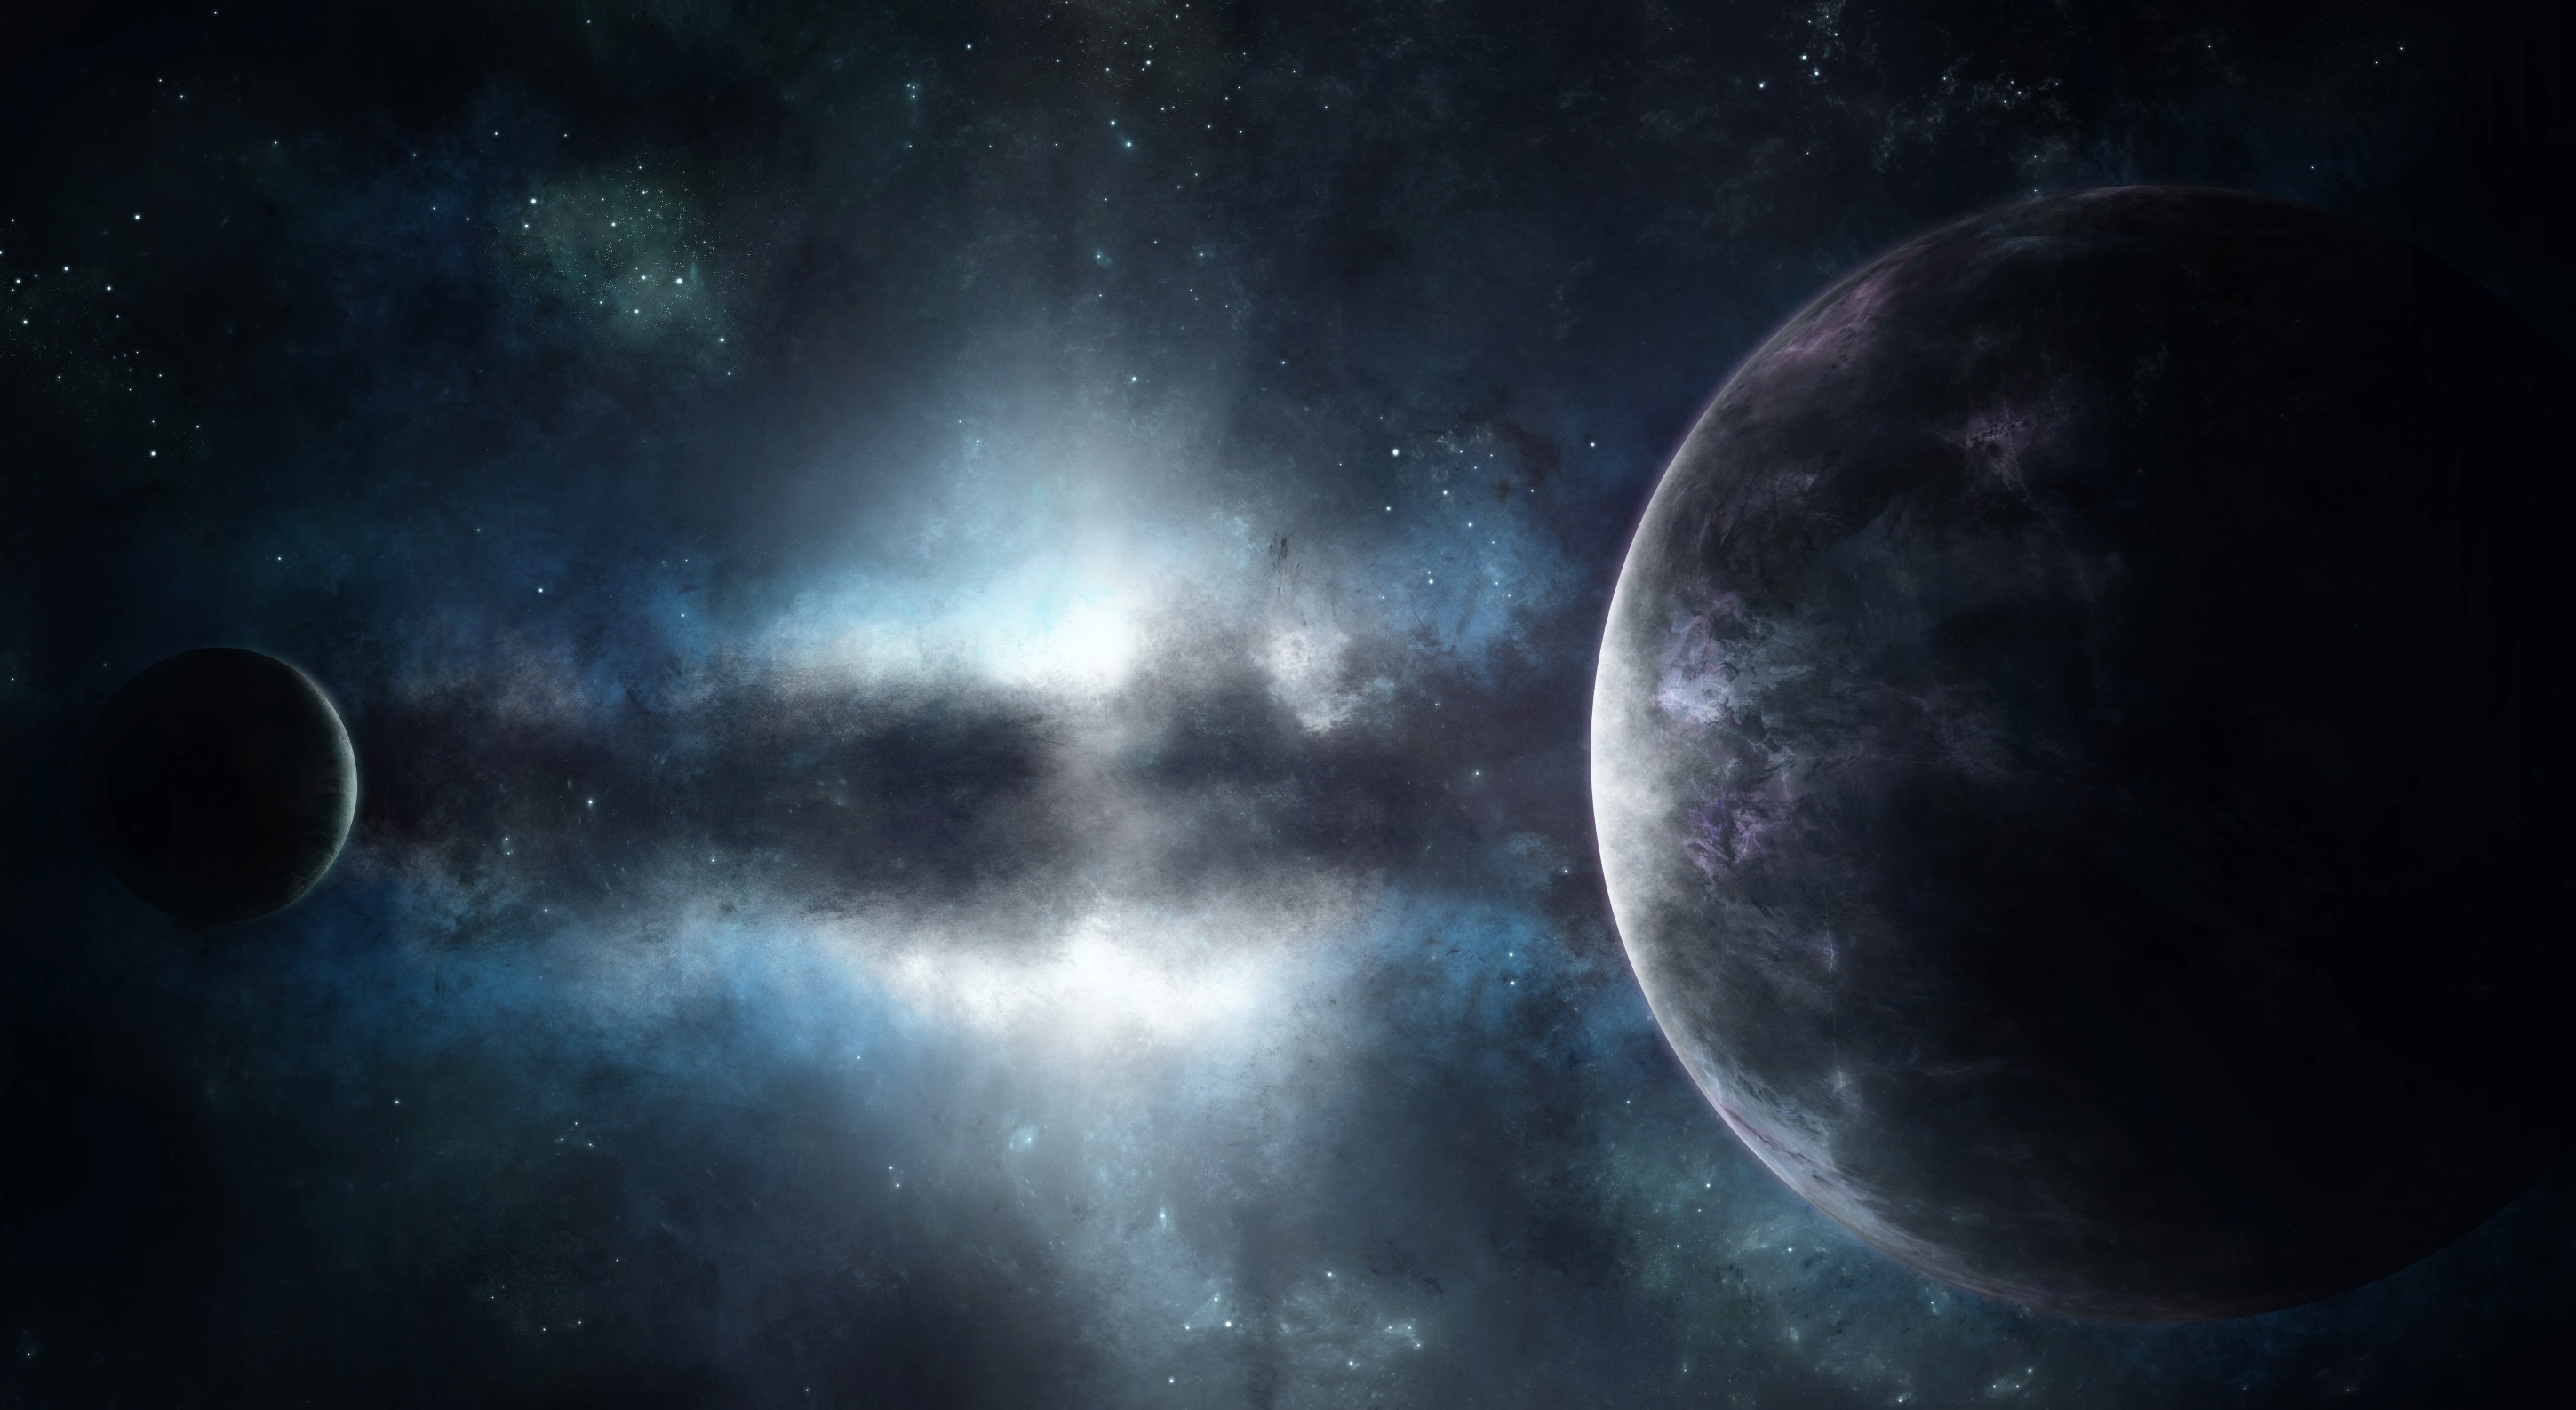 Two planets and cosmic glow wallpapers and images - wallpapers ...